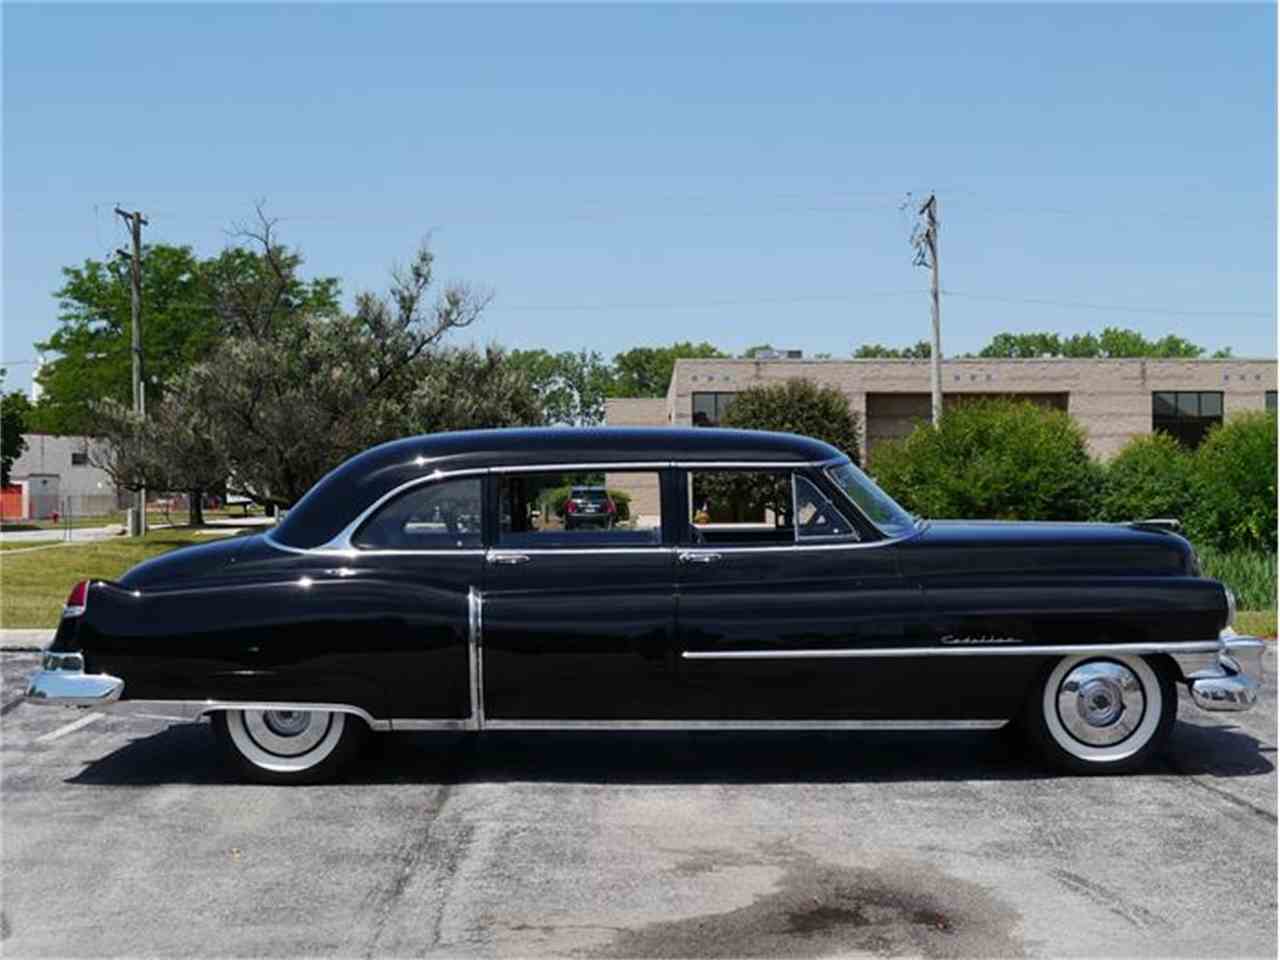 1950 Cadillac Fleetwood 75 Imperial for Sale | ClassicCars ...